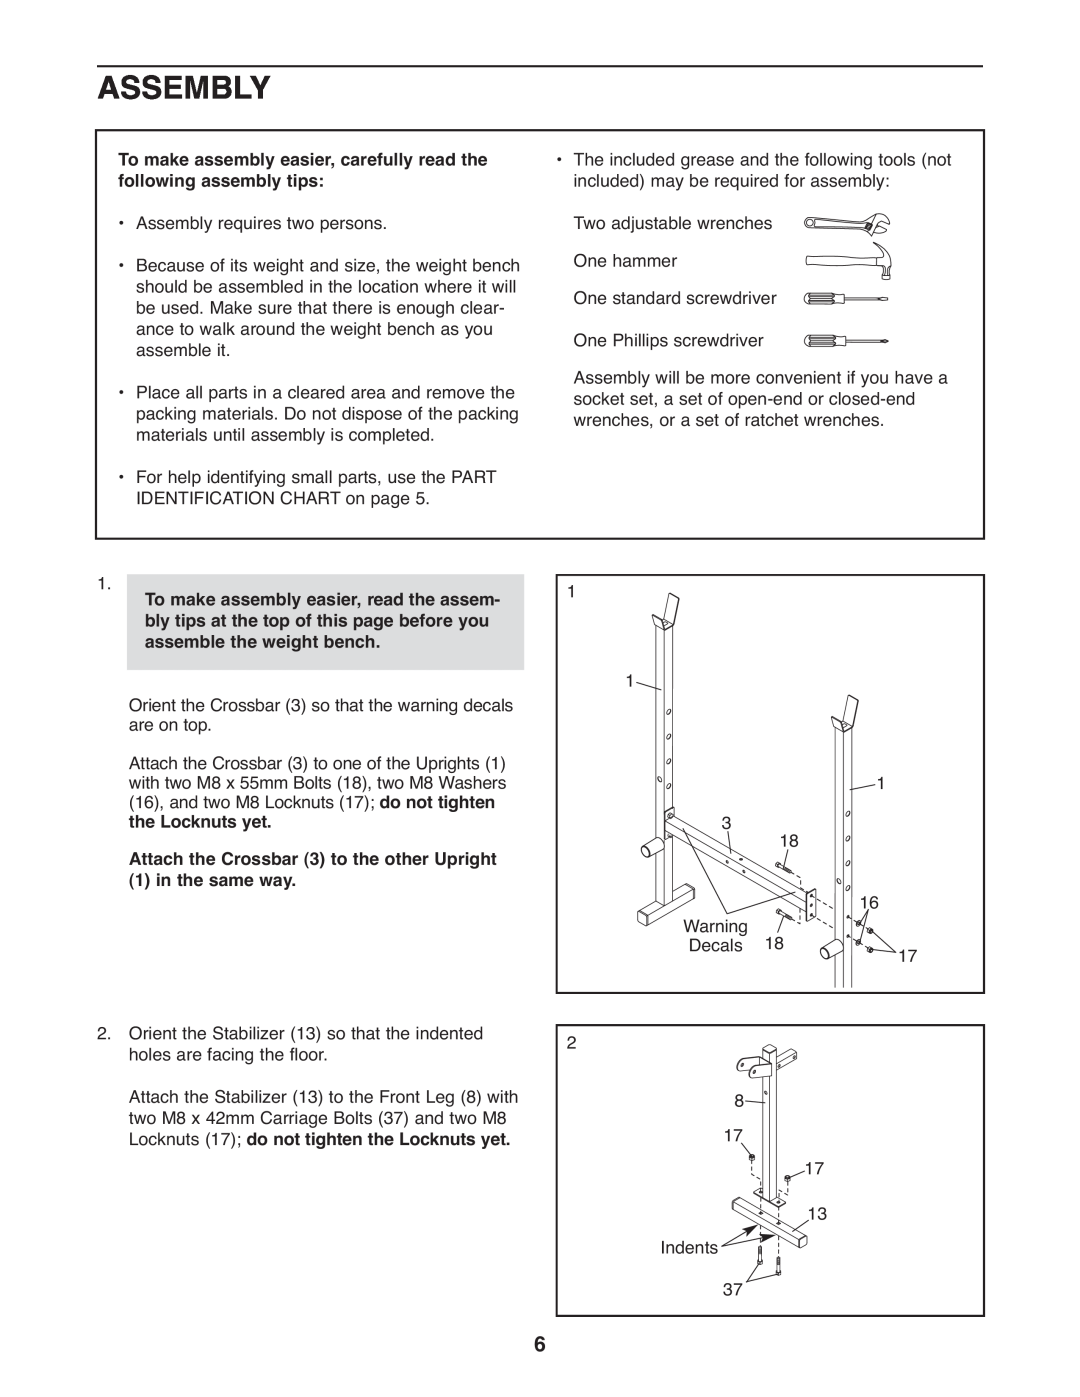 Weider 831.15999.1, WEBE0939.1 user manual Assembly, To make assembly easier, carefully read the following assembly tips 